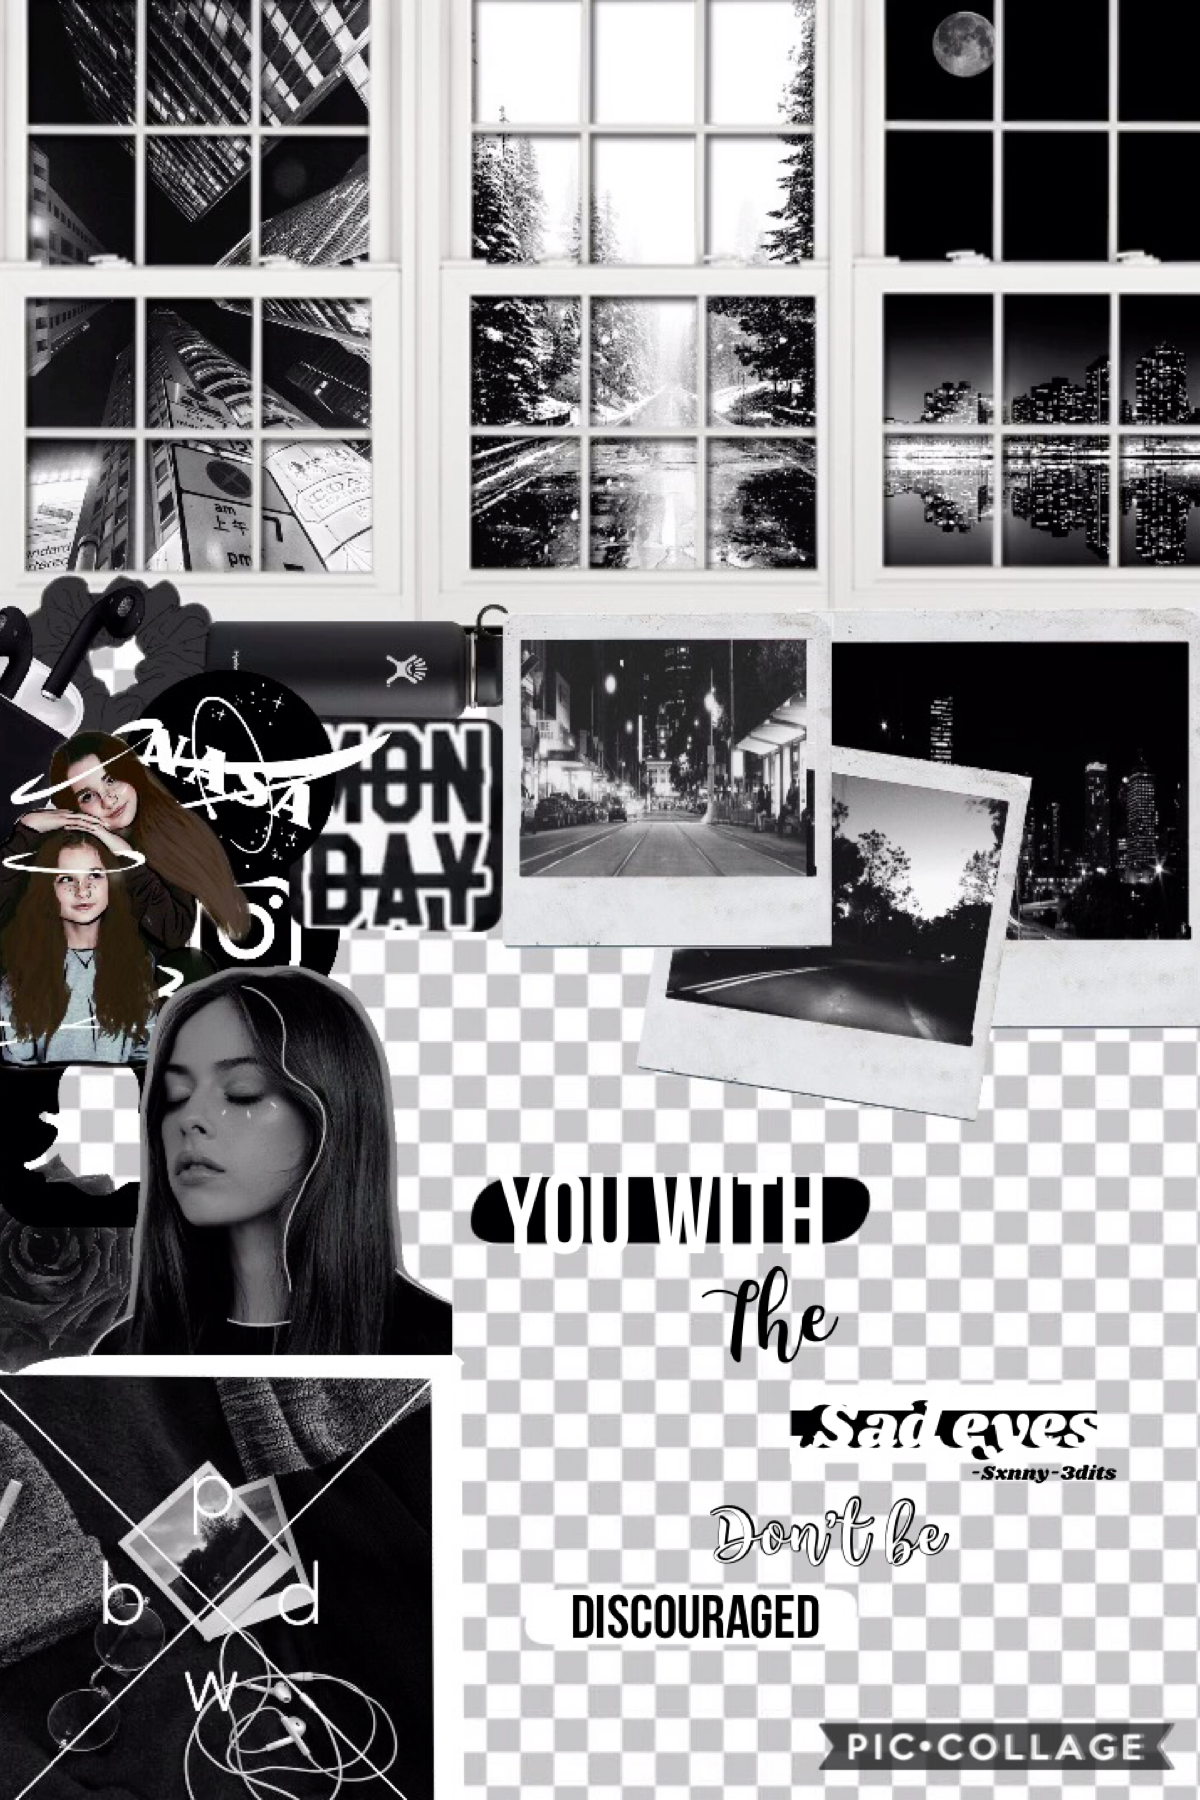 Black and white collage? New style?